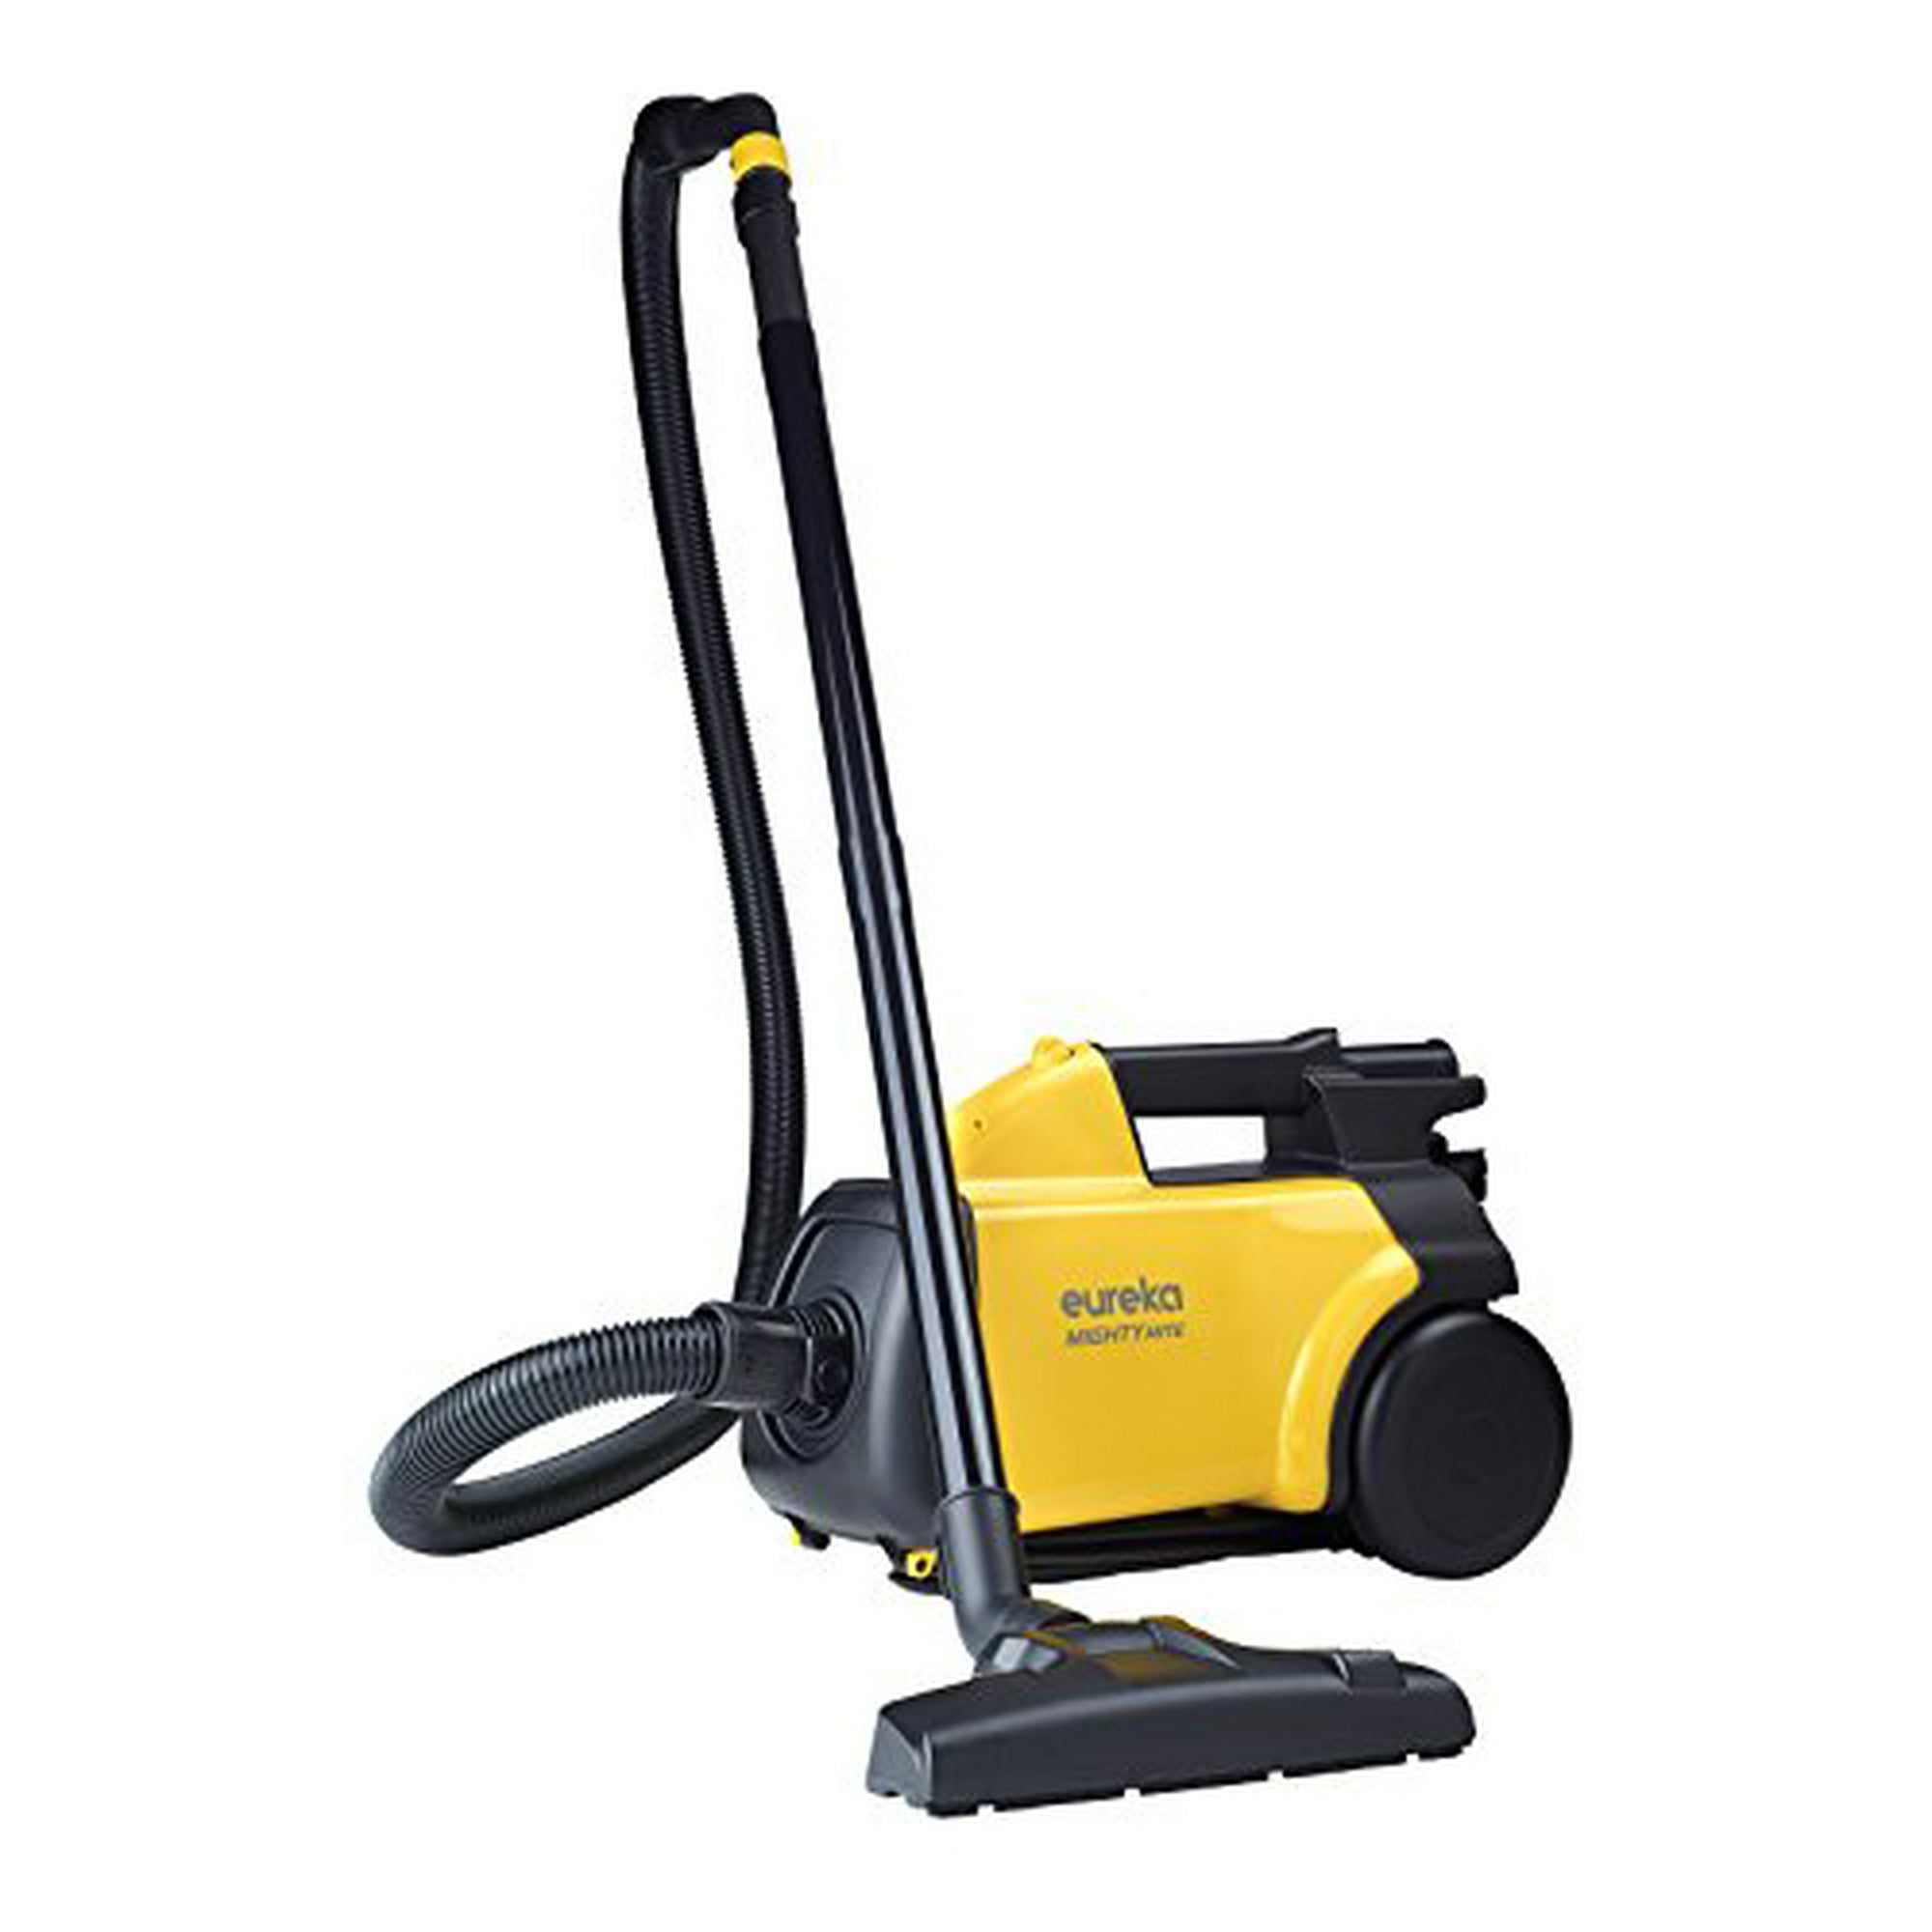 Eureka Mighty Mite 3670G Corded Canister Vacuum Cleaner Yellow 3670G-Yell Pet 